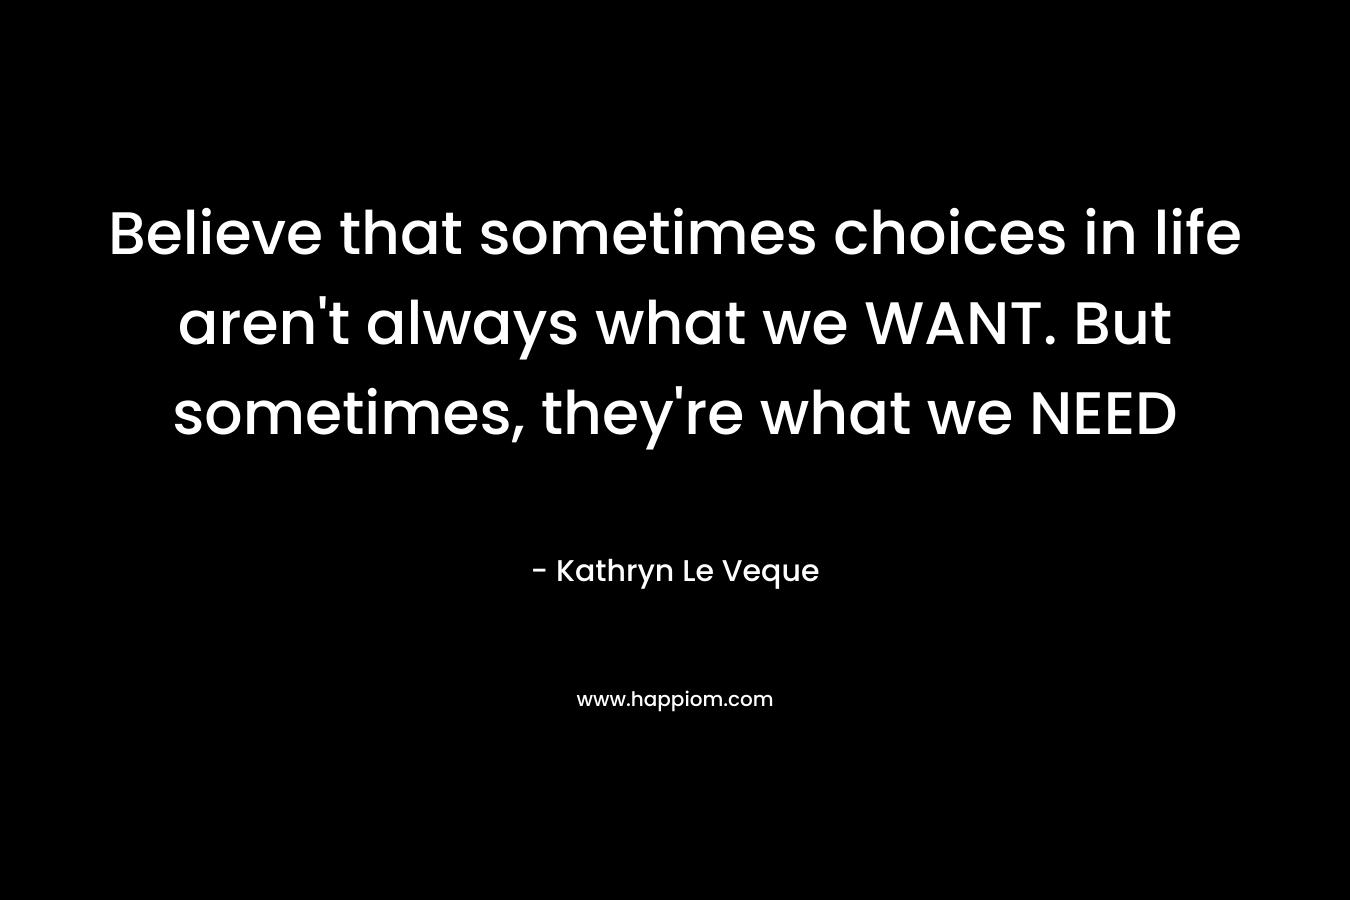 Believe that sometimes choices in life aren’t always what we WANT. But sometimes, they’re what we NEED – Kathryn Le Veque